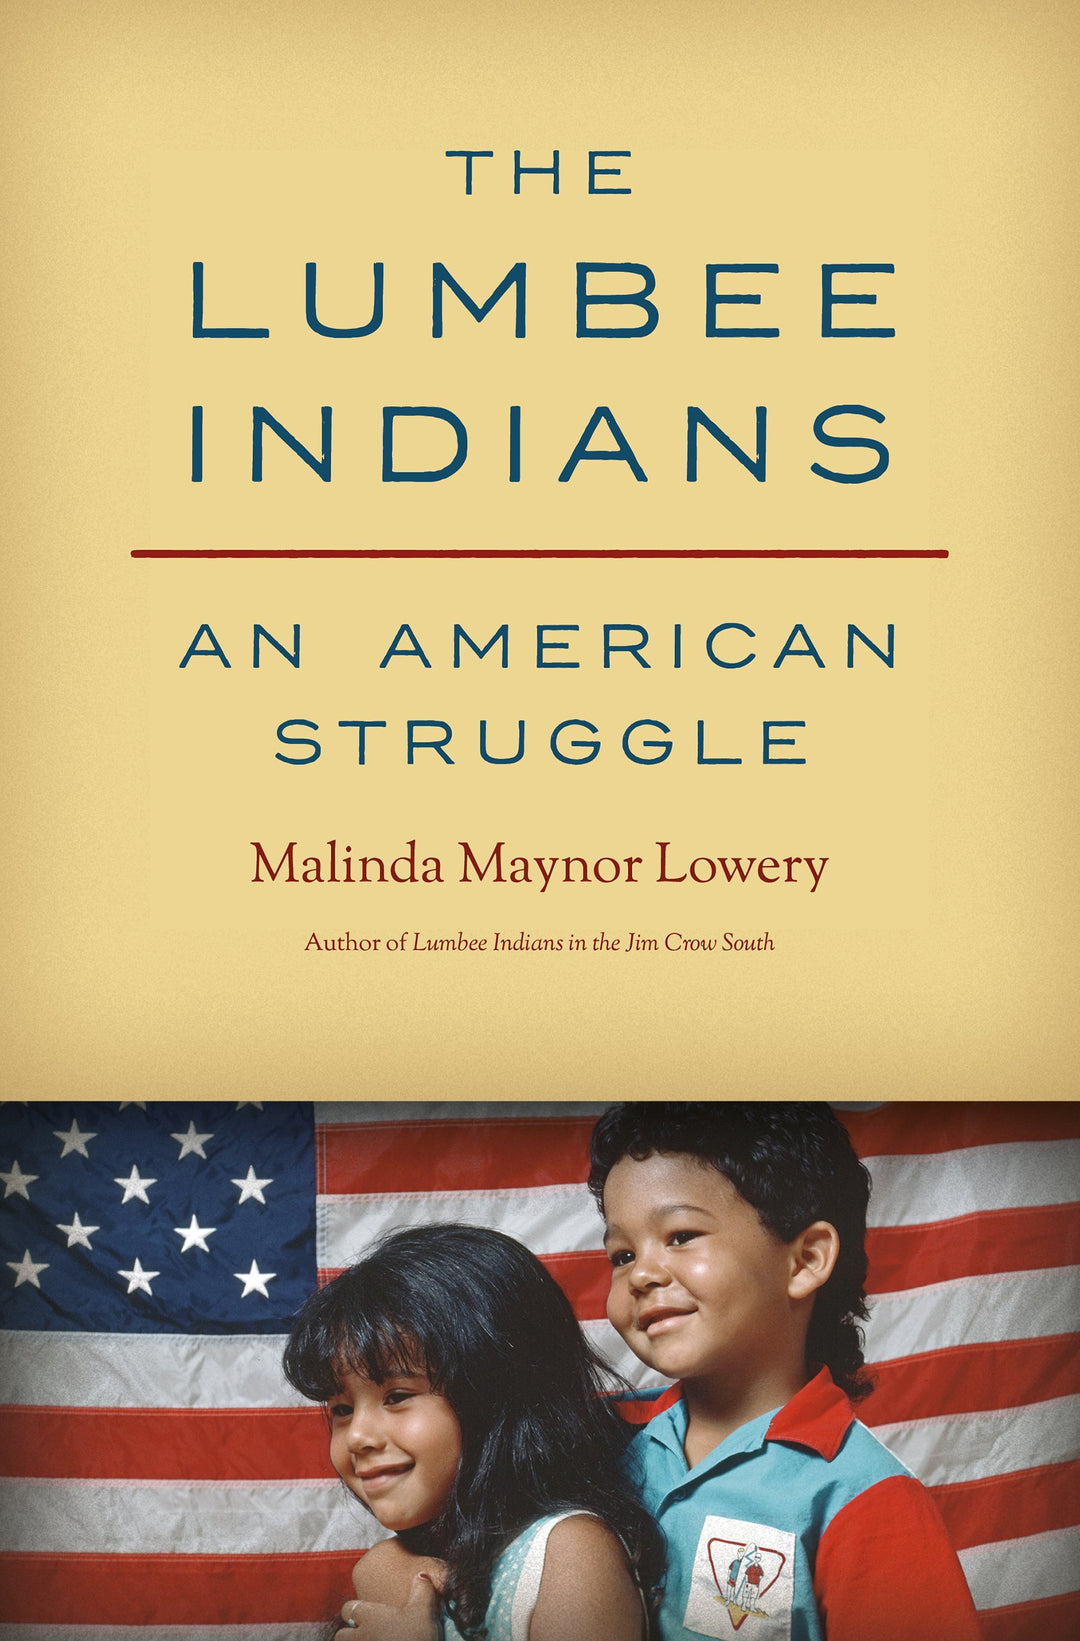 The Lumbee Indians: An American Struggle by Malinda Maynor Lowery